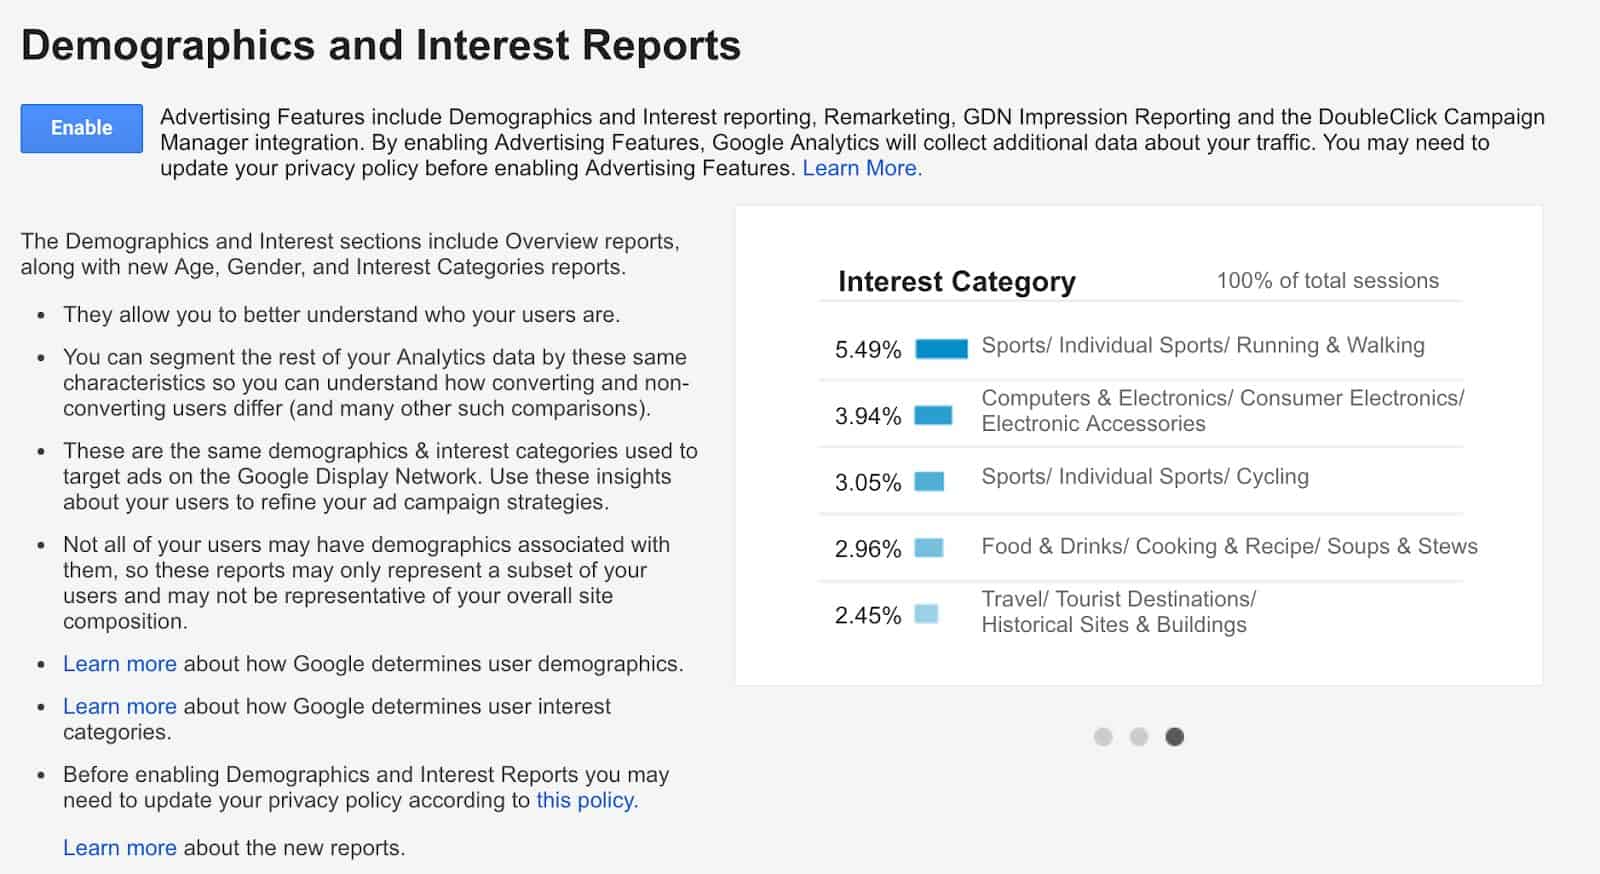 Enable Demographics and Interest Reports in Google Analytics